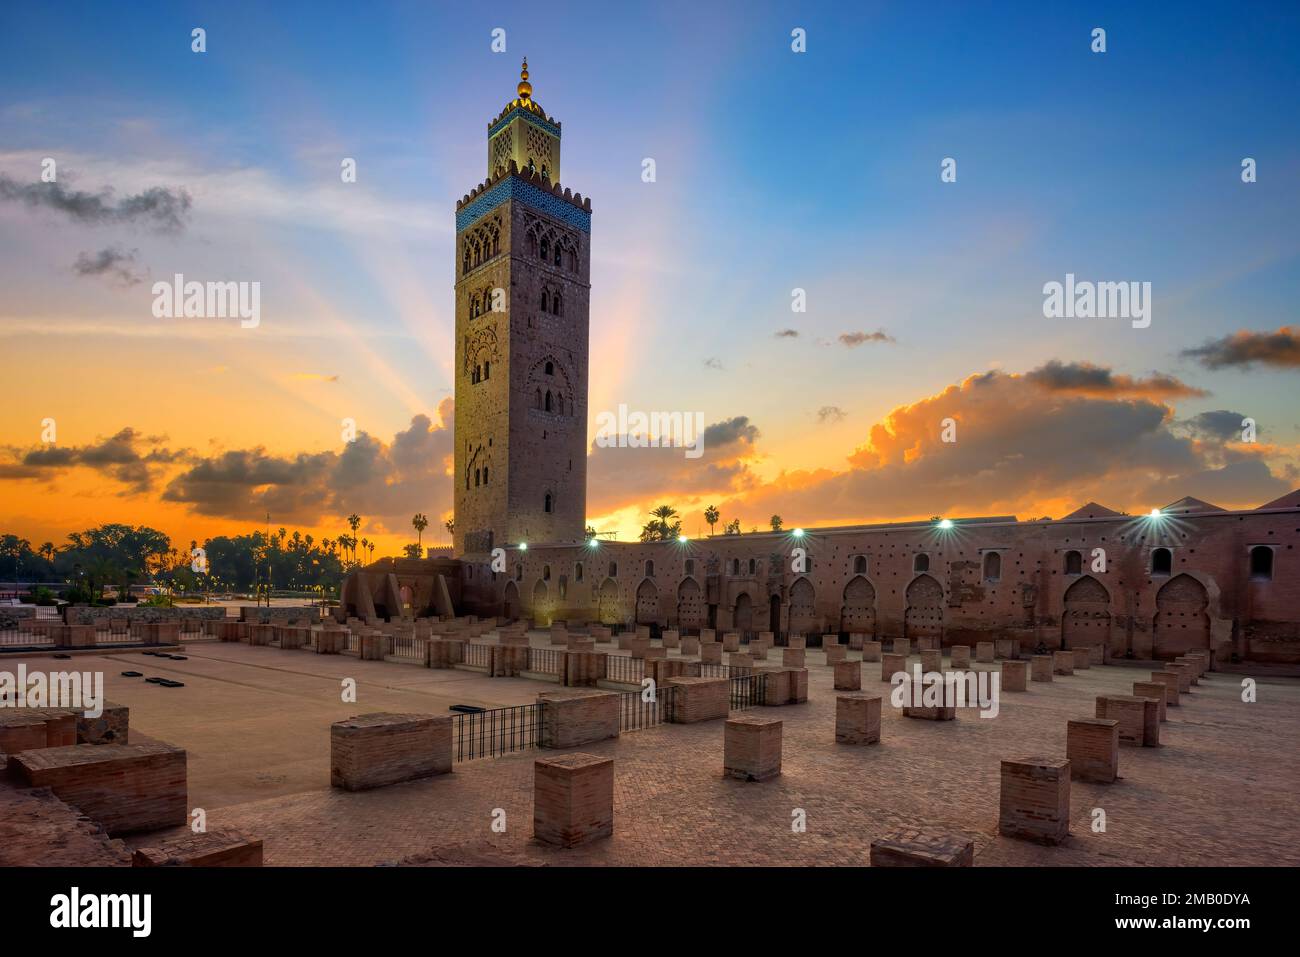 Koutoubia mosque in Marrakech at sunrise, Morocco Stock Photo